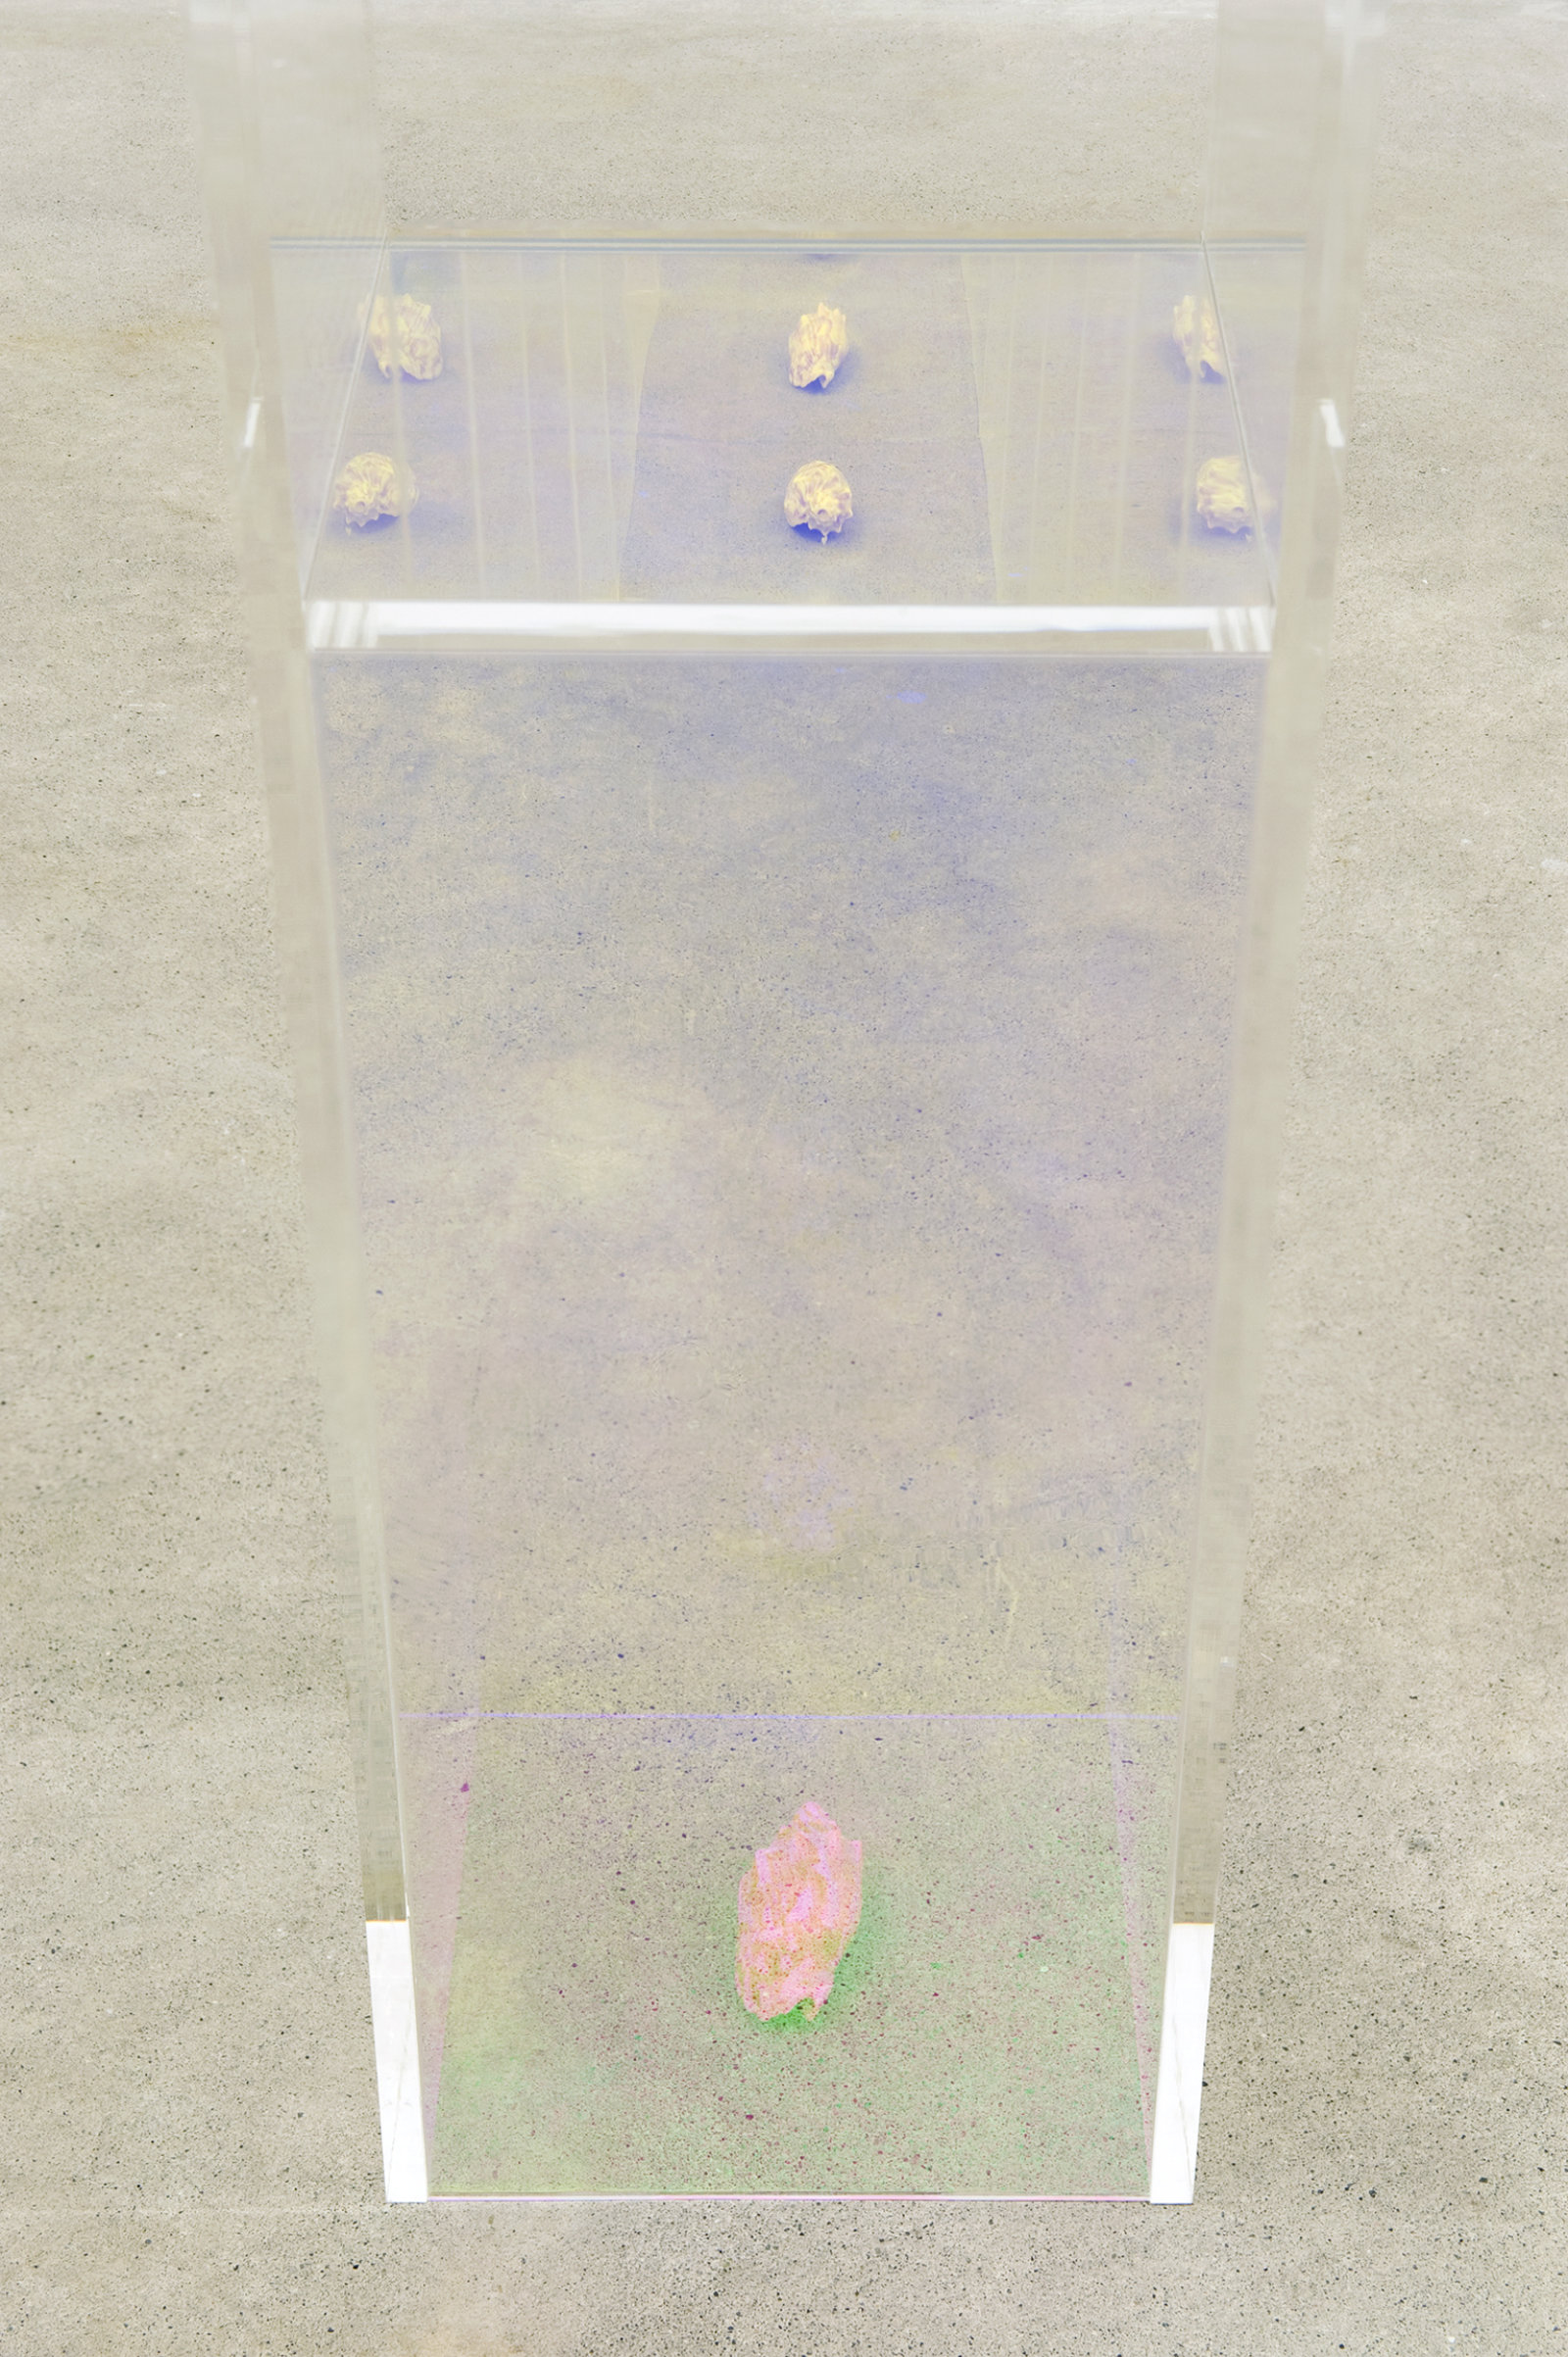 Judy Radul, Women and Film (detail), 2011, dichroic and clear acrylic, copy of Wide Angle magazine (vol. 6, no. 3, special issue on Feminism and Film, 1984), seashell, 60 x 8 x 9 in. (152 x 20 x 23 cm)